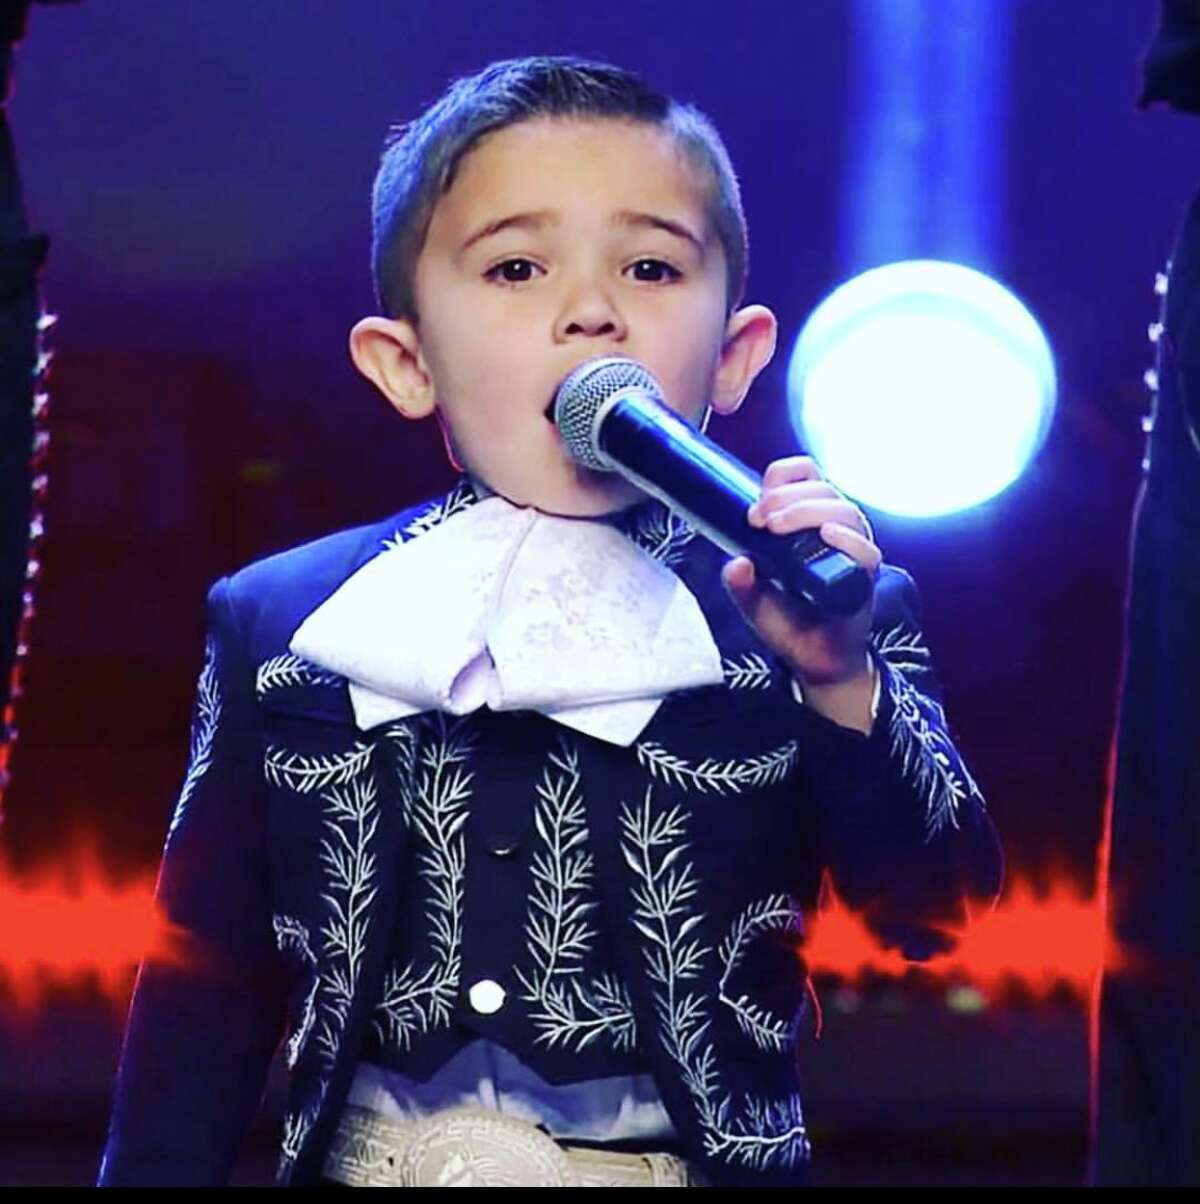 Mateo Lopez, from San Antonio will be on the new season of "Little Big Shots" on NBC.